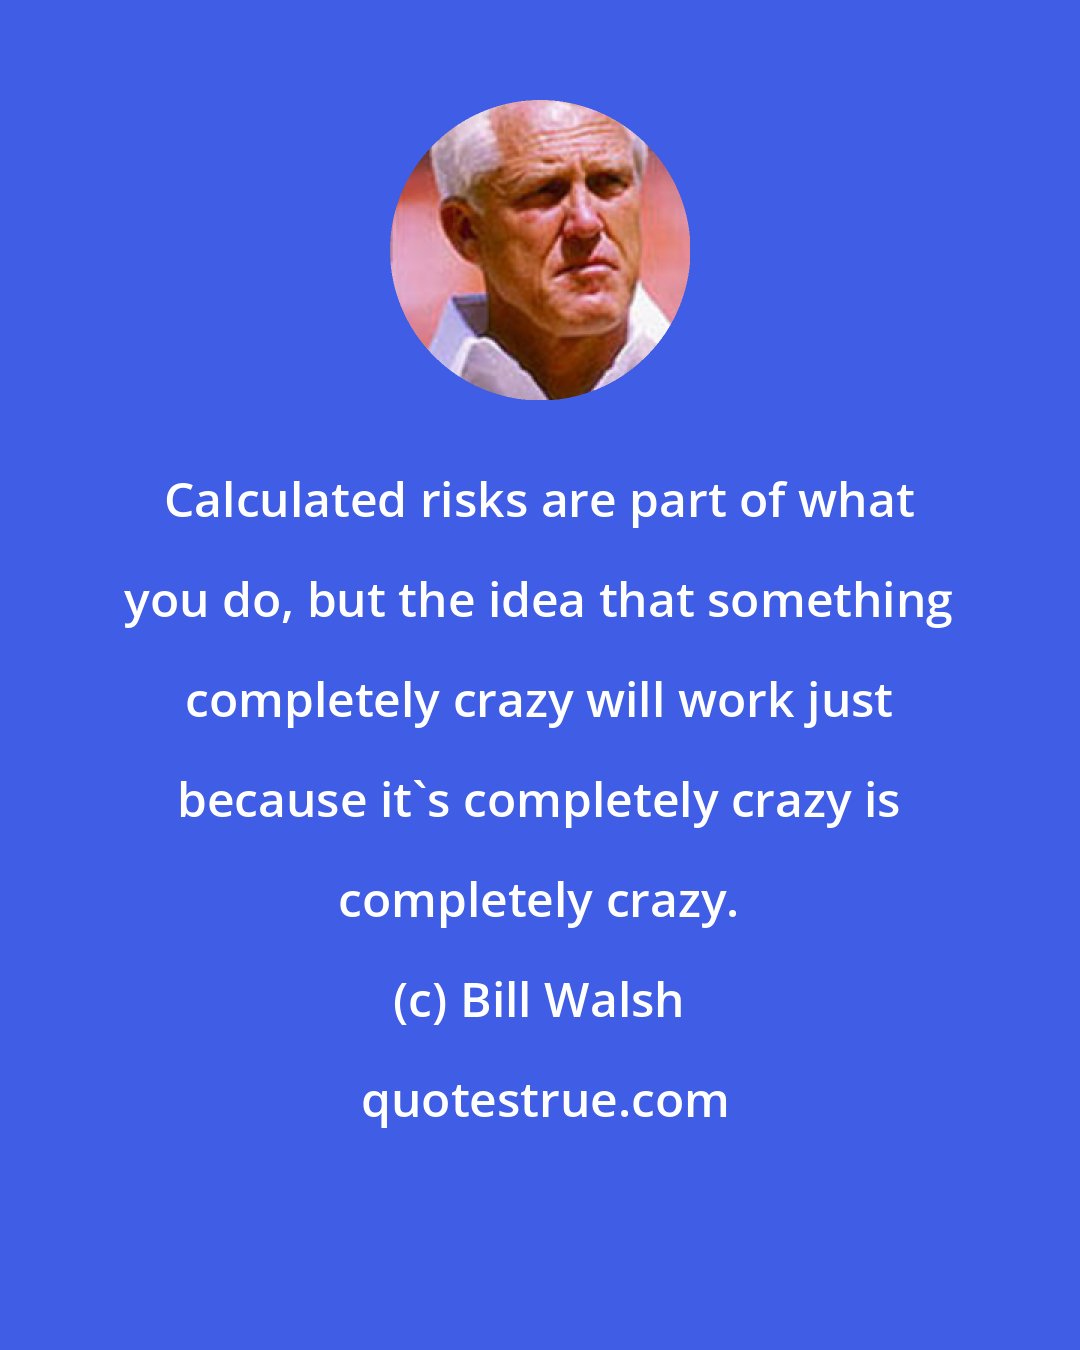 Bill Walsh: Calculated risks are part of what you do, but the idea that something completely crazy will work just because it's completely crazy is completely crazy.